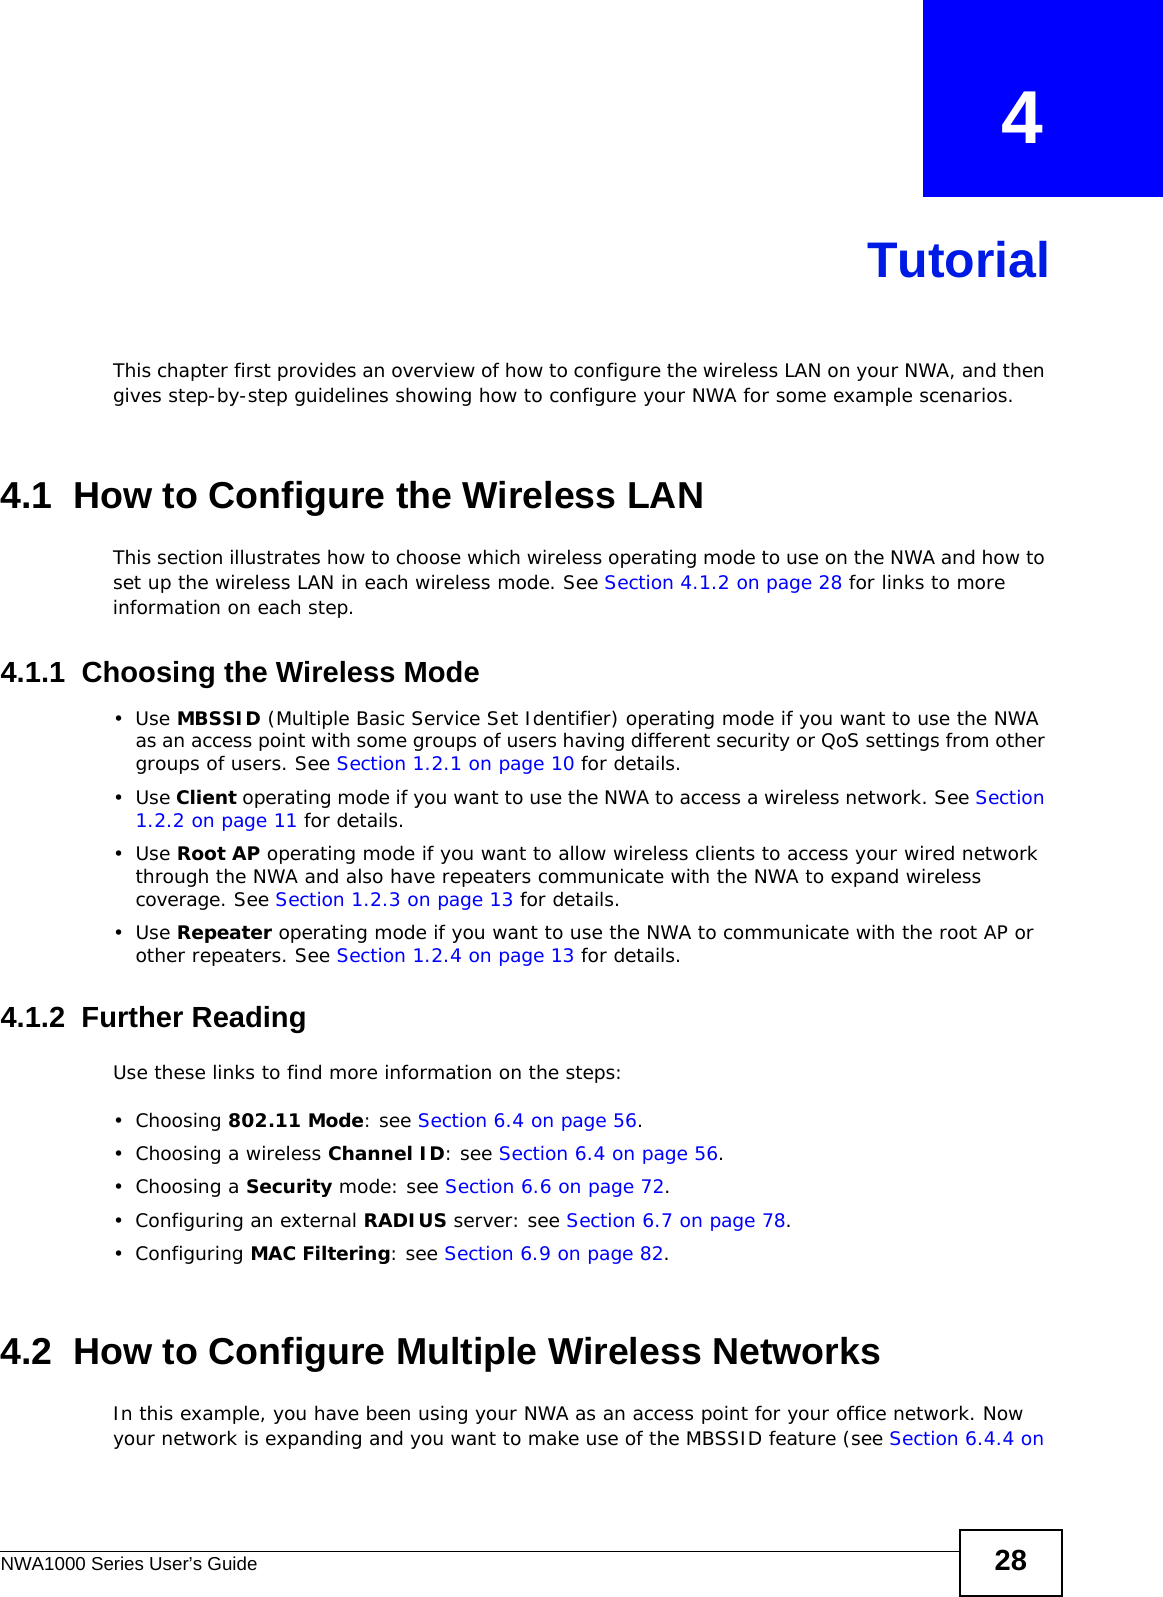 NWA1000 Series User’s Guide 28CHAPTER   4TutorialThis chapter first provides an overview of how to configure the wireless LAN on your NWA, and then gives step-by-step guidelines showing how to configure your NWA for some example scenarios. 4.1  How to Configure the Wireless LANThis section illustrates how to choose which wireless operating mode to use on the NWA and how to set up the wireless LAN in each wireless mode. See Section 4.1.2 on page 28 for links to more information on each step.4.1.1  Choosing the Wireless Mode•Use MBSSID (Multiple Basic Service Set Identifier) operating mode if you want to use the NWA as an access point with some groups of users having different security or QoS settings from other groups of users. See Section 1.2.1 on page 10 for details.•Use Client operating mode if you want to use the NWA to access a wireless network. See Section 1.2.2 on page 11 for details.•Use Root AP operating mode if you want to allow wireless clients to access your wired network through the NWA and also have repeaters communicate with the NWA to expand wireless coverage. See Section 1.2.3 on page 13 for details.•Use Repeater operating mode if you want to use the NWA to communicate with the root AP or other repeaters. See Section 1.2.4 on page 13 for details.4.1.2  Further ReadingUse these links to find more information on the steps:• Choosing 802.11 Mode: see Section 6.4 on page 56.• Choosing a wireless Channel ID: see Section 6.4 on page 56.• Choosing a Security mode: see Section 6.6 on page 72.• Configuring an external RADIUS server: see Section 6.7 on page 78.•Configuring MAC Filtering: see Section 6.9 on page 82.4.2  How to Configure Multiple Wireless NetworksIn this example, you have been using your NWA as an access point for your office network. Now your network is expanding and you want to make use of the MBSSID feature (see Section 6.4.4 on 